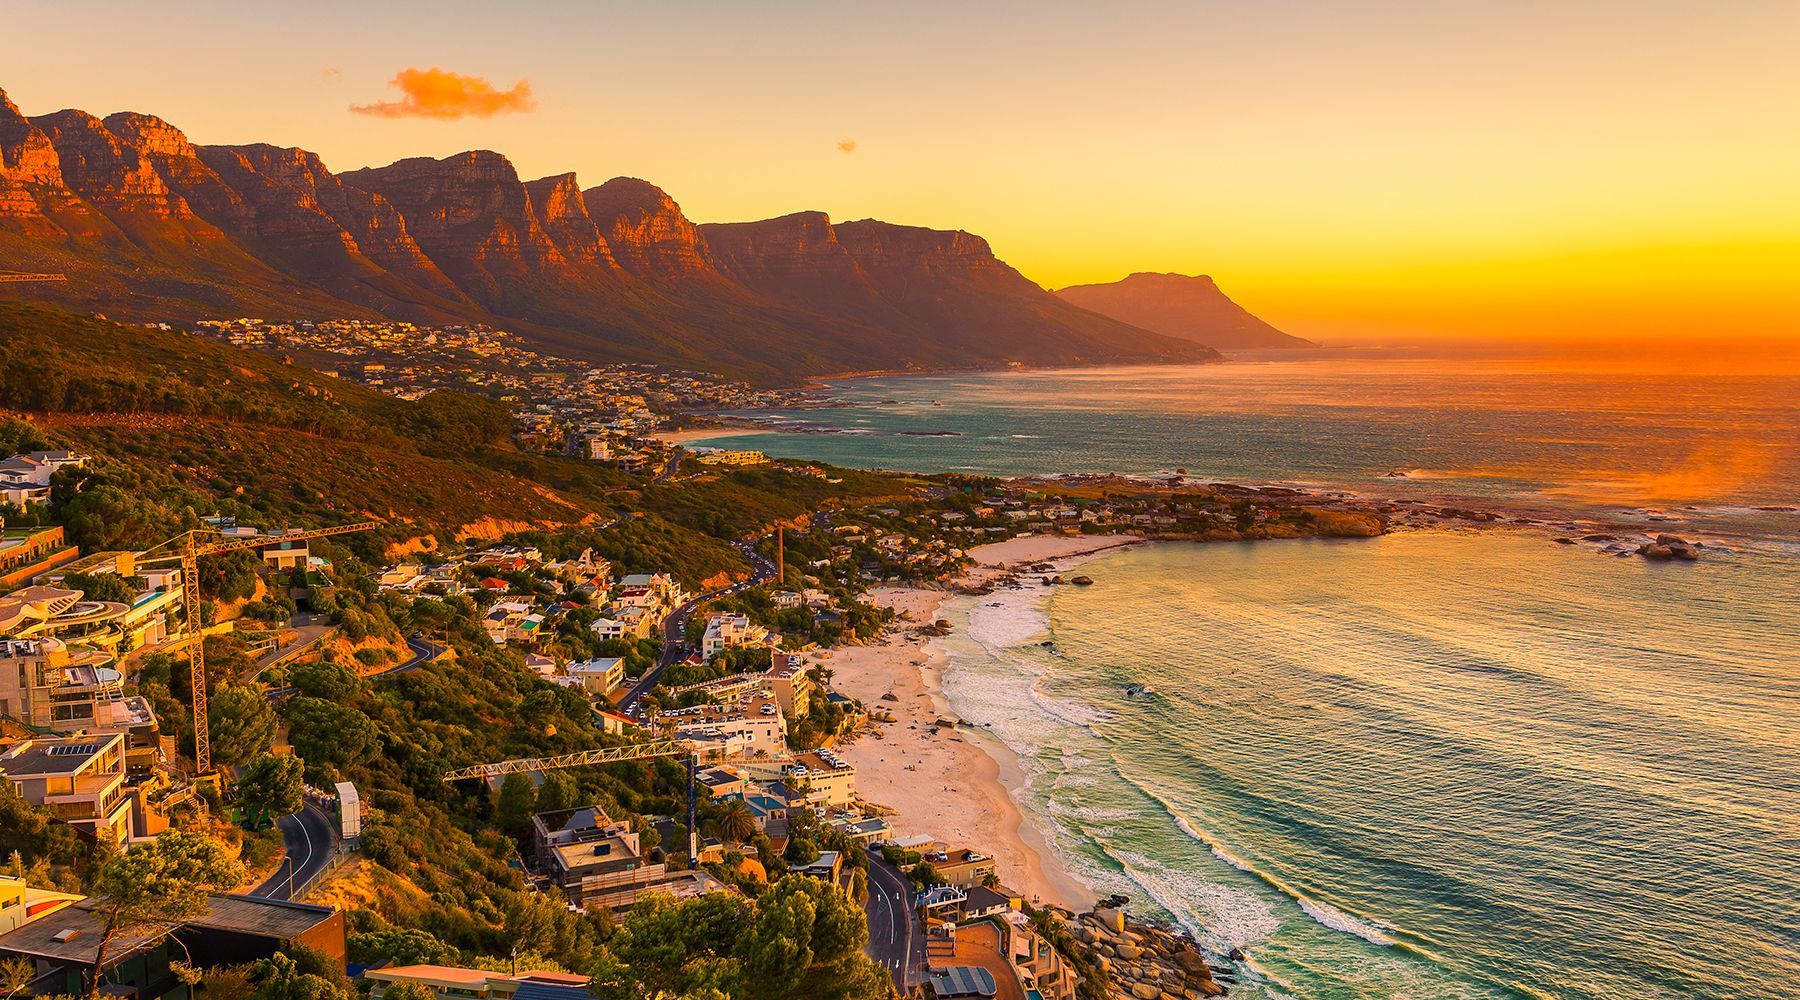 A day trip in Cape Town, South Africa, for $84